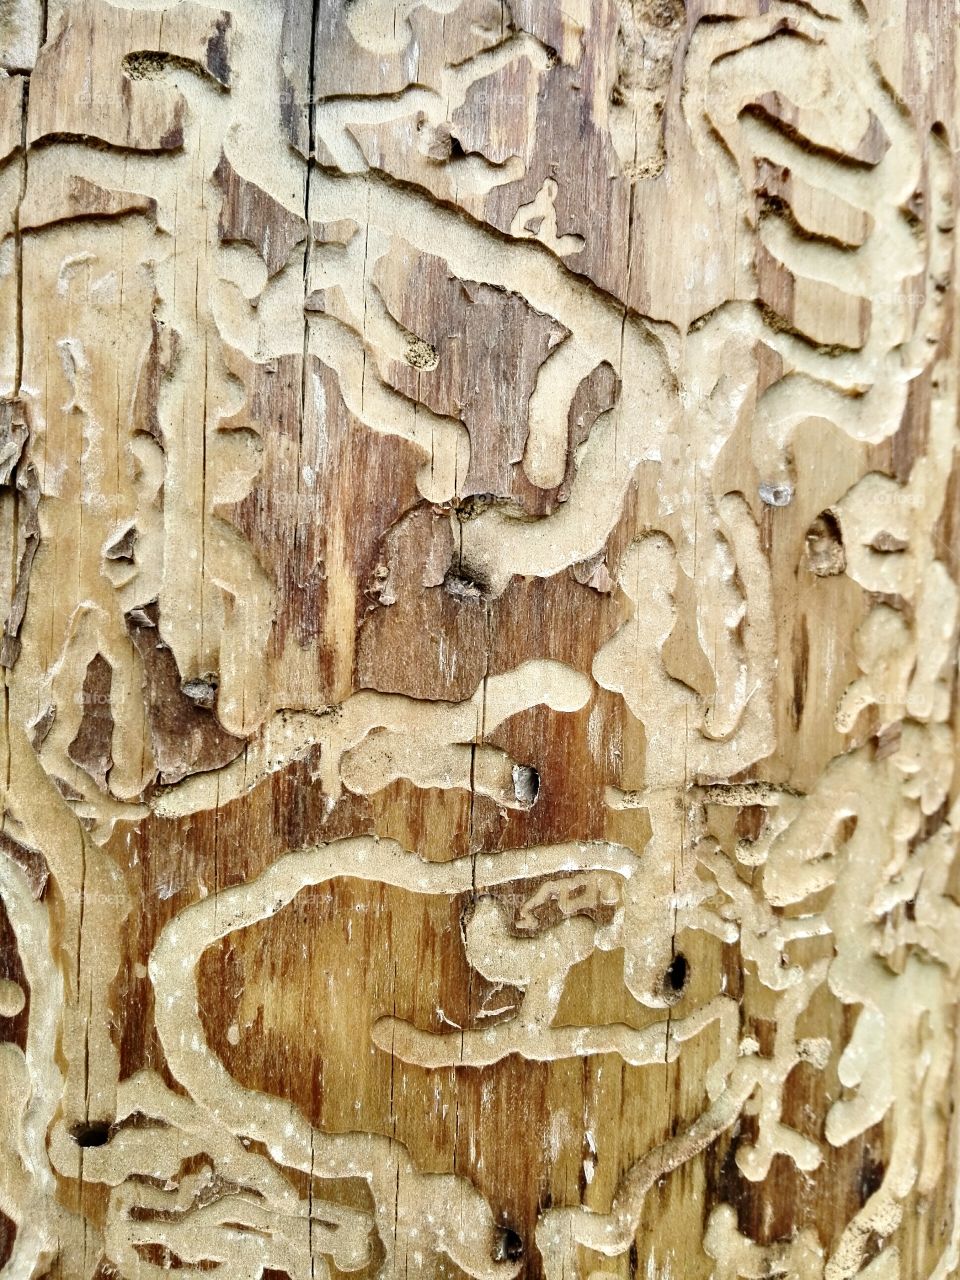 Traces of bark beetles